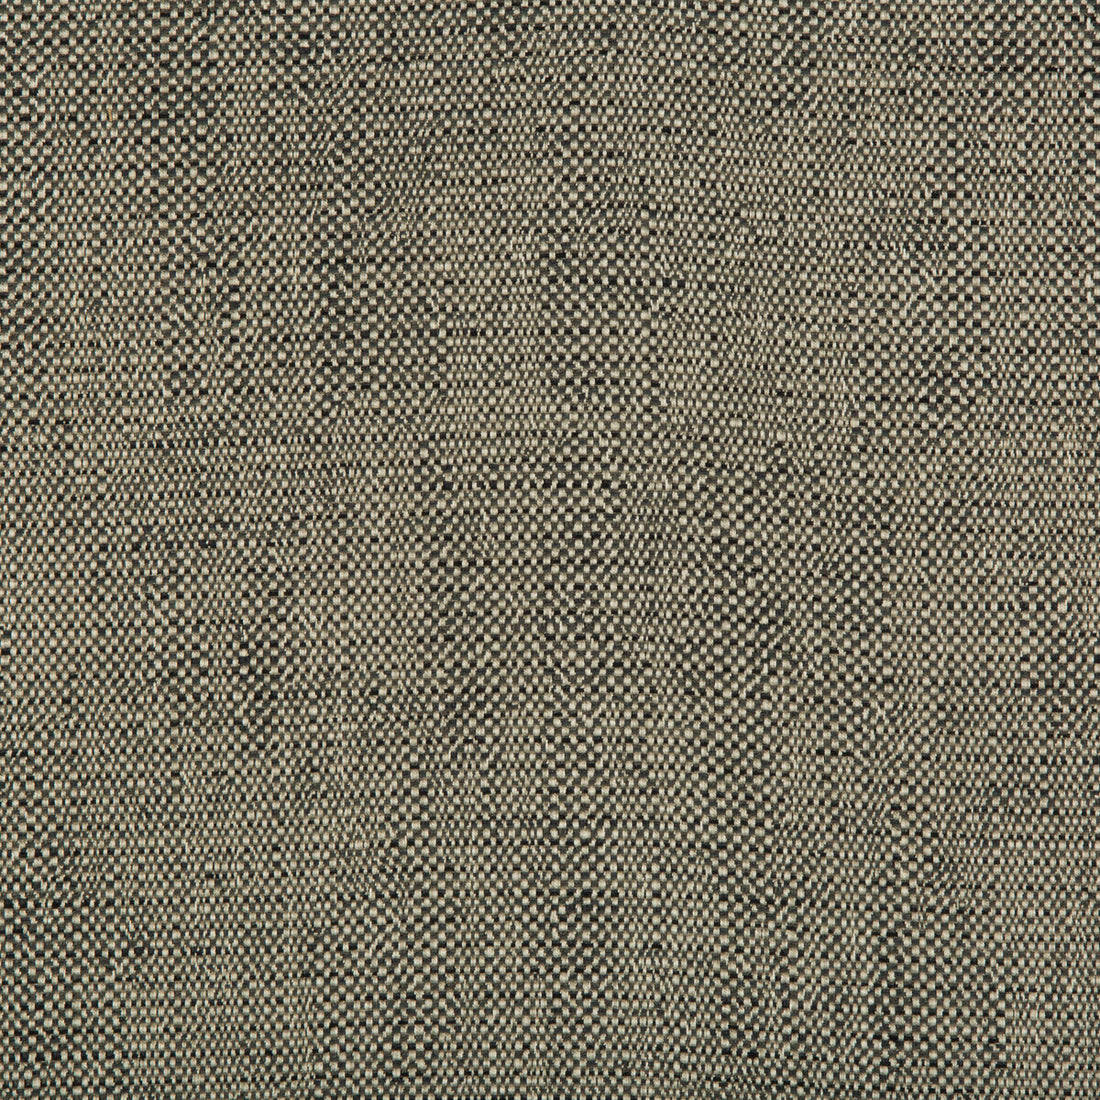 Kravet Contract fabric in 35132-21 color - pattern 35132.21.0 - by Kravet Contract in the Incase Crypton Gis collection